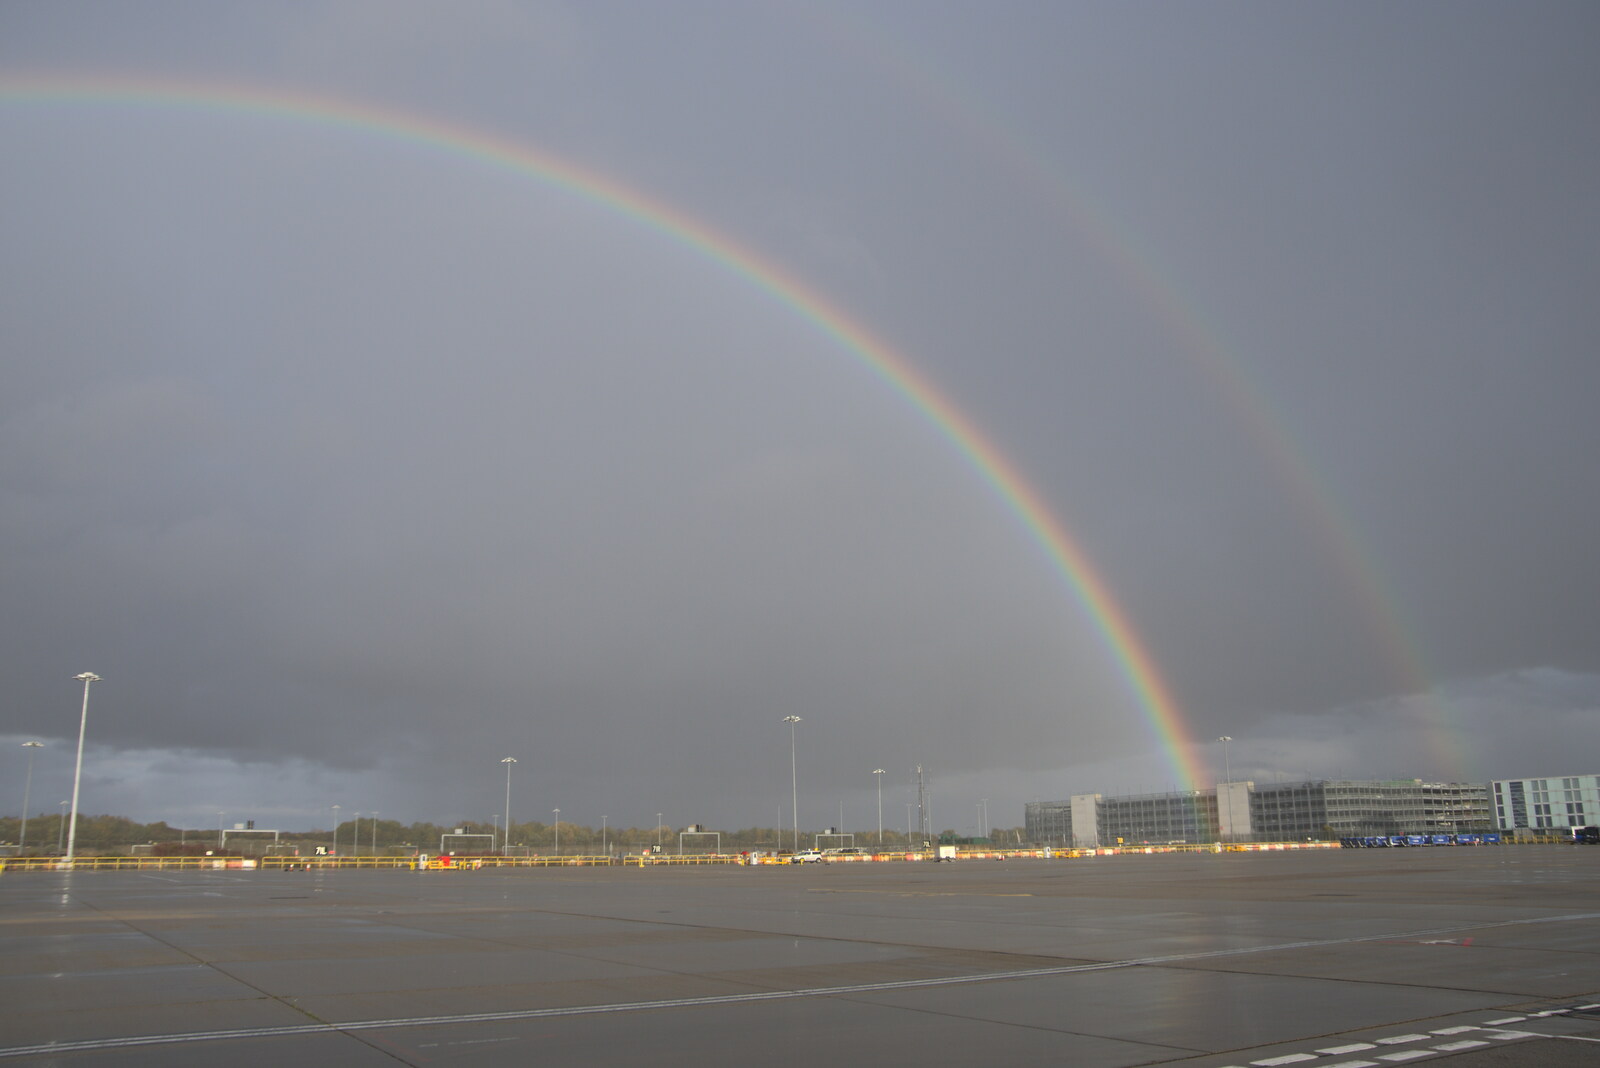 There's a double rainbow over the airport from The Volcanoes of Lanzarote, Canary Islands, Spain - 27th October 2021